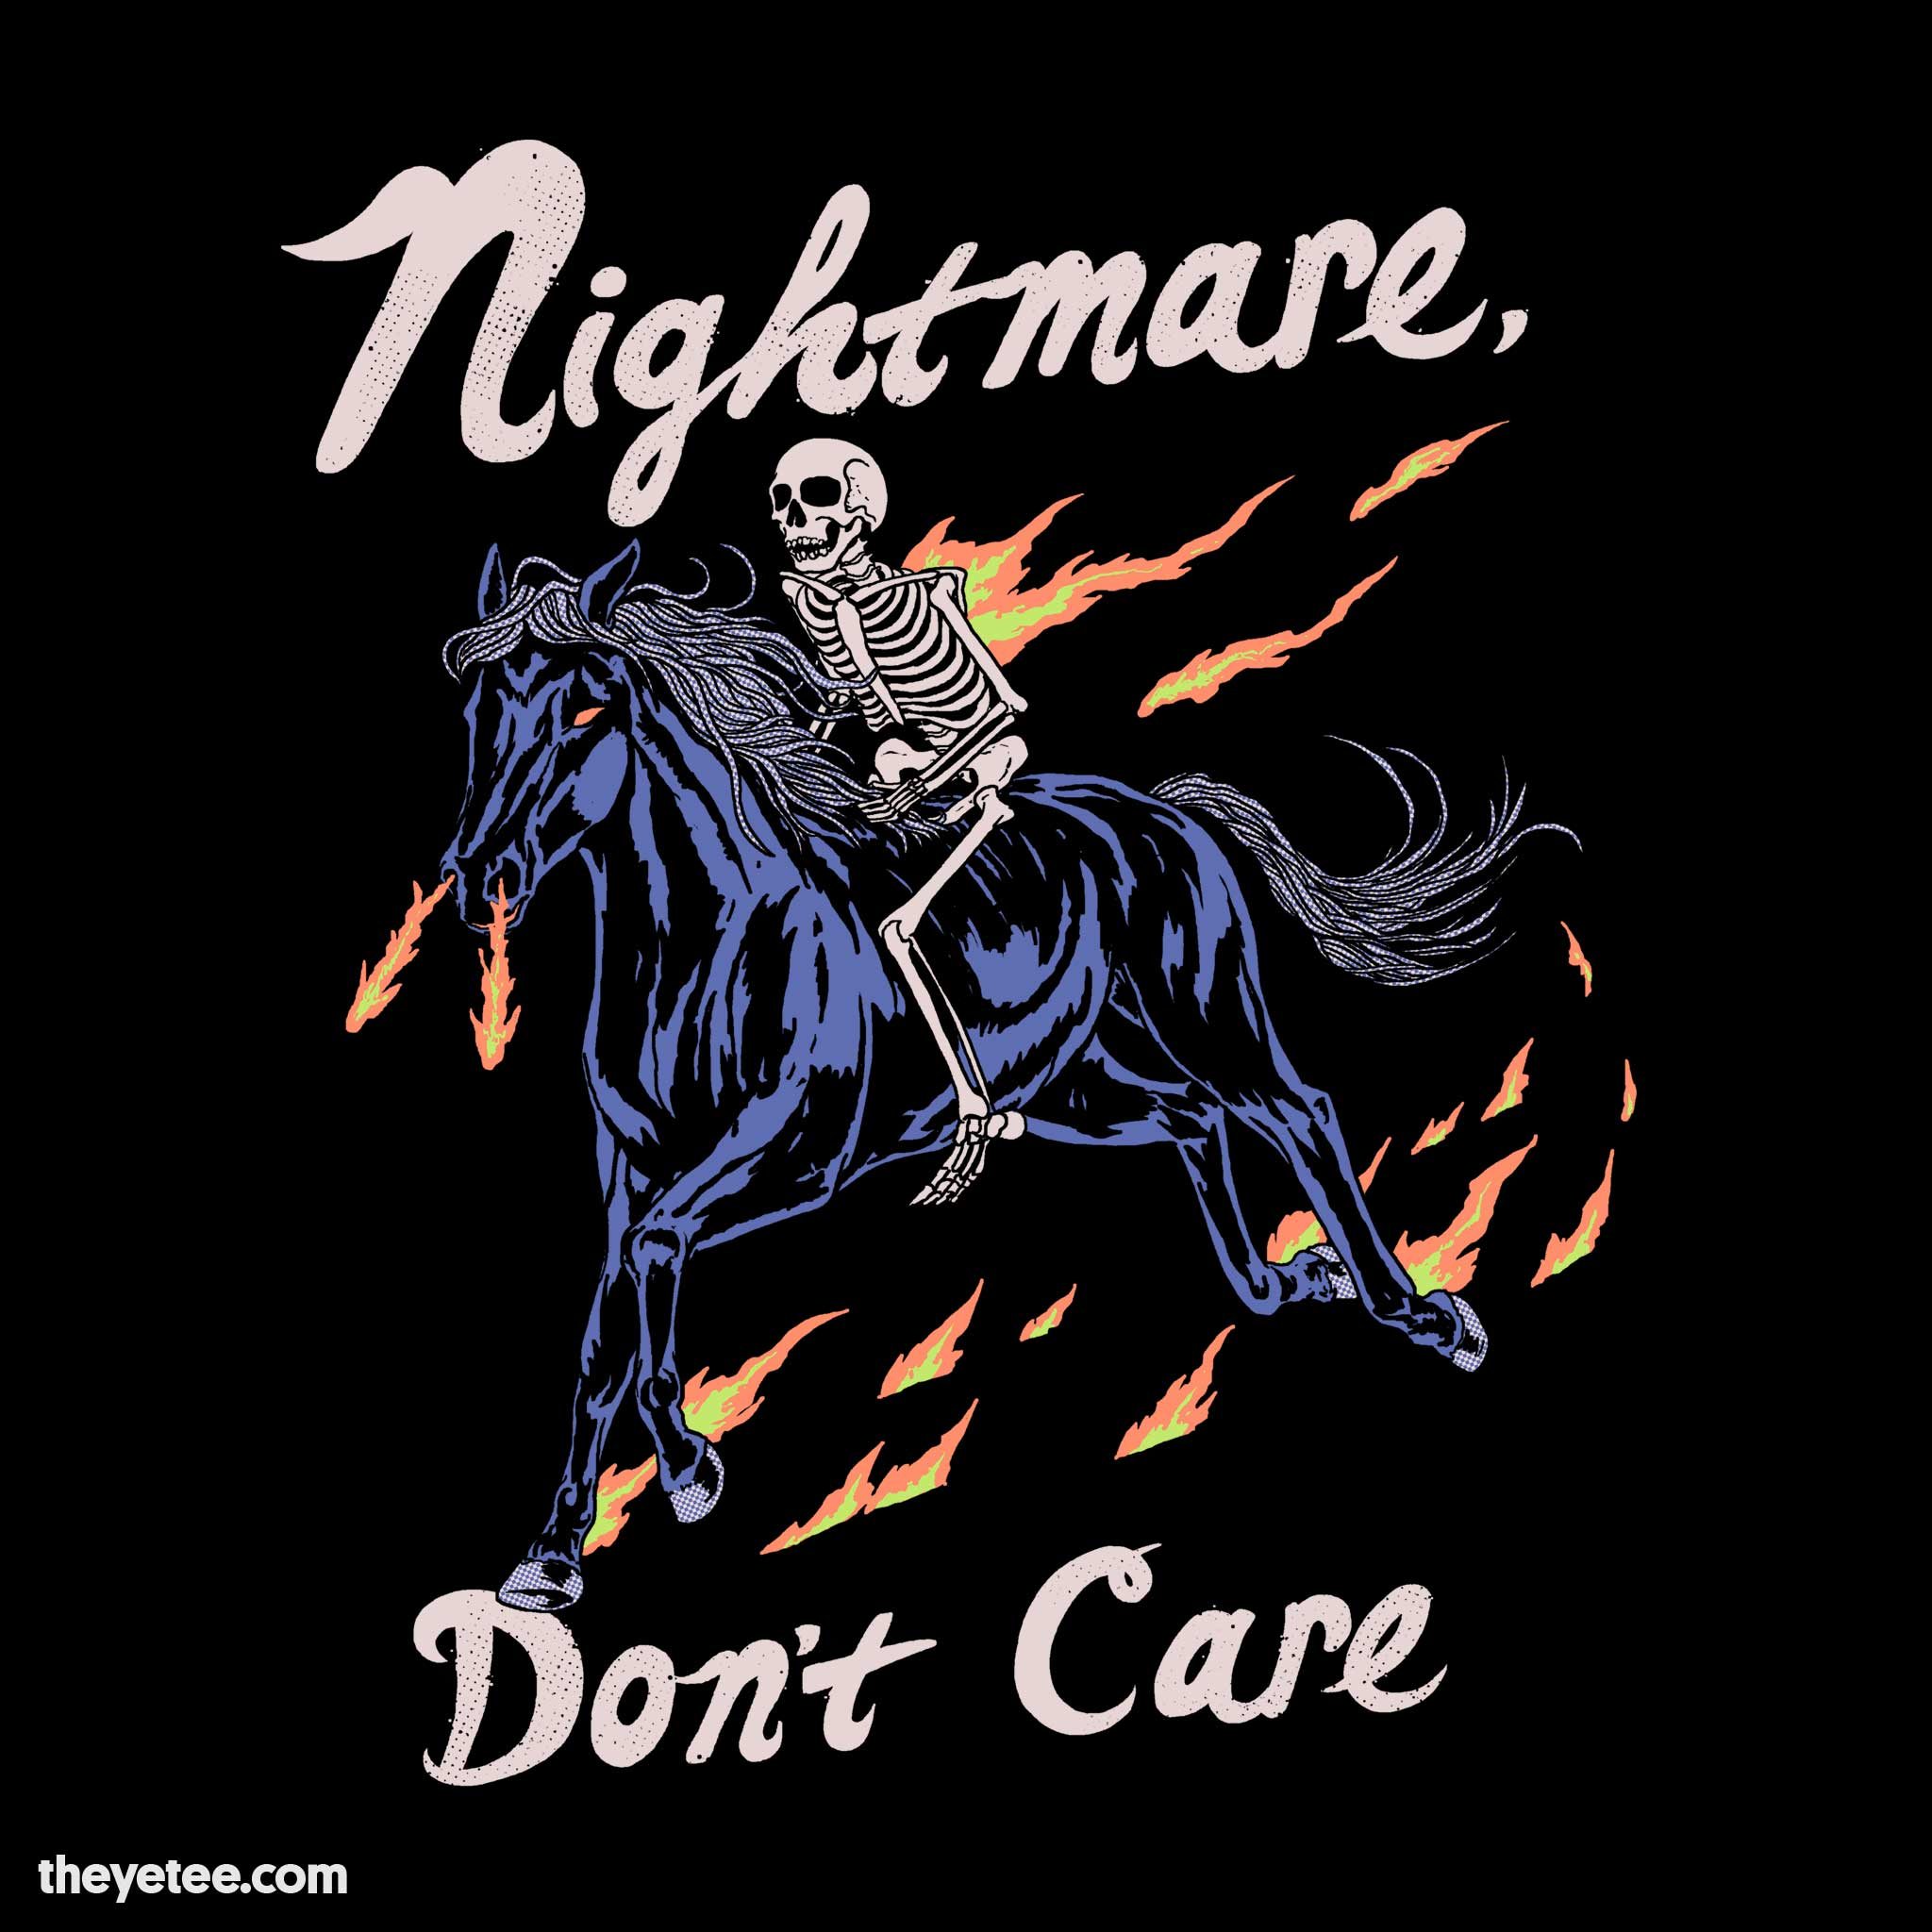 Image of Nightmare, Don't Care